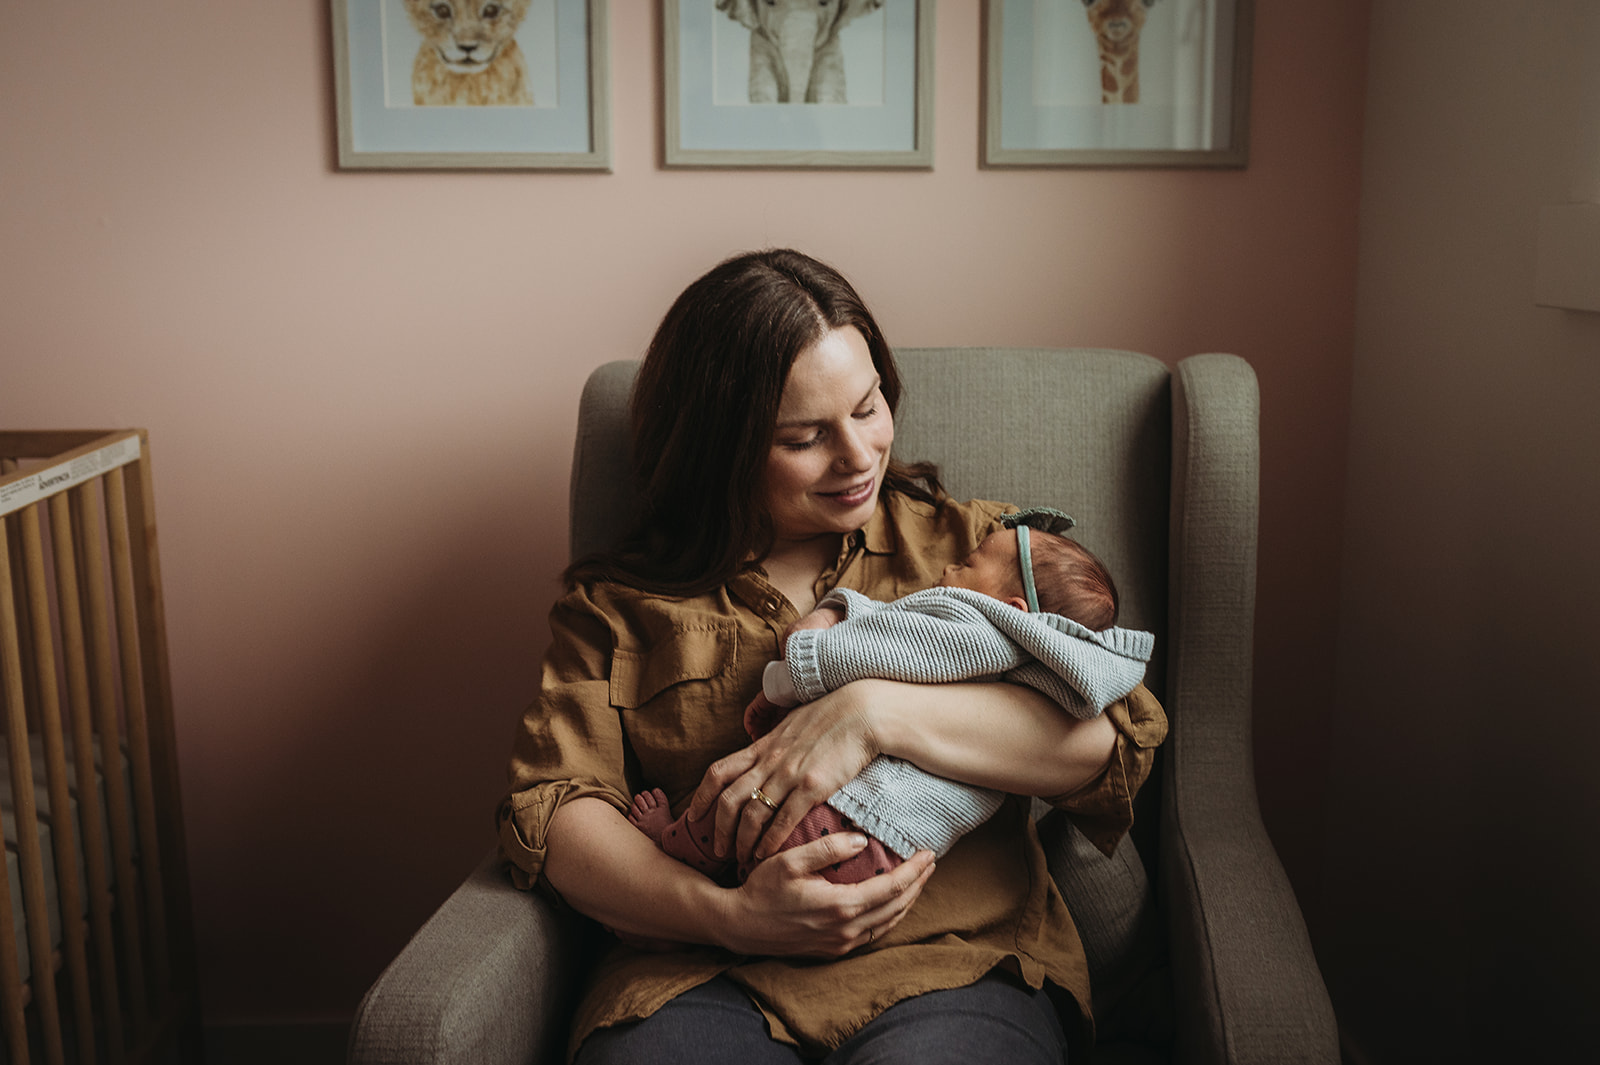 Beautiful home newborn photography session captured in the Comox Valley, BC, Canada